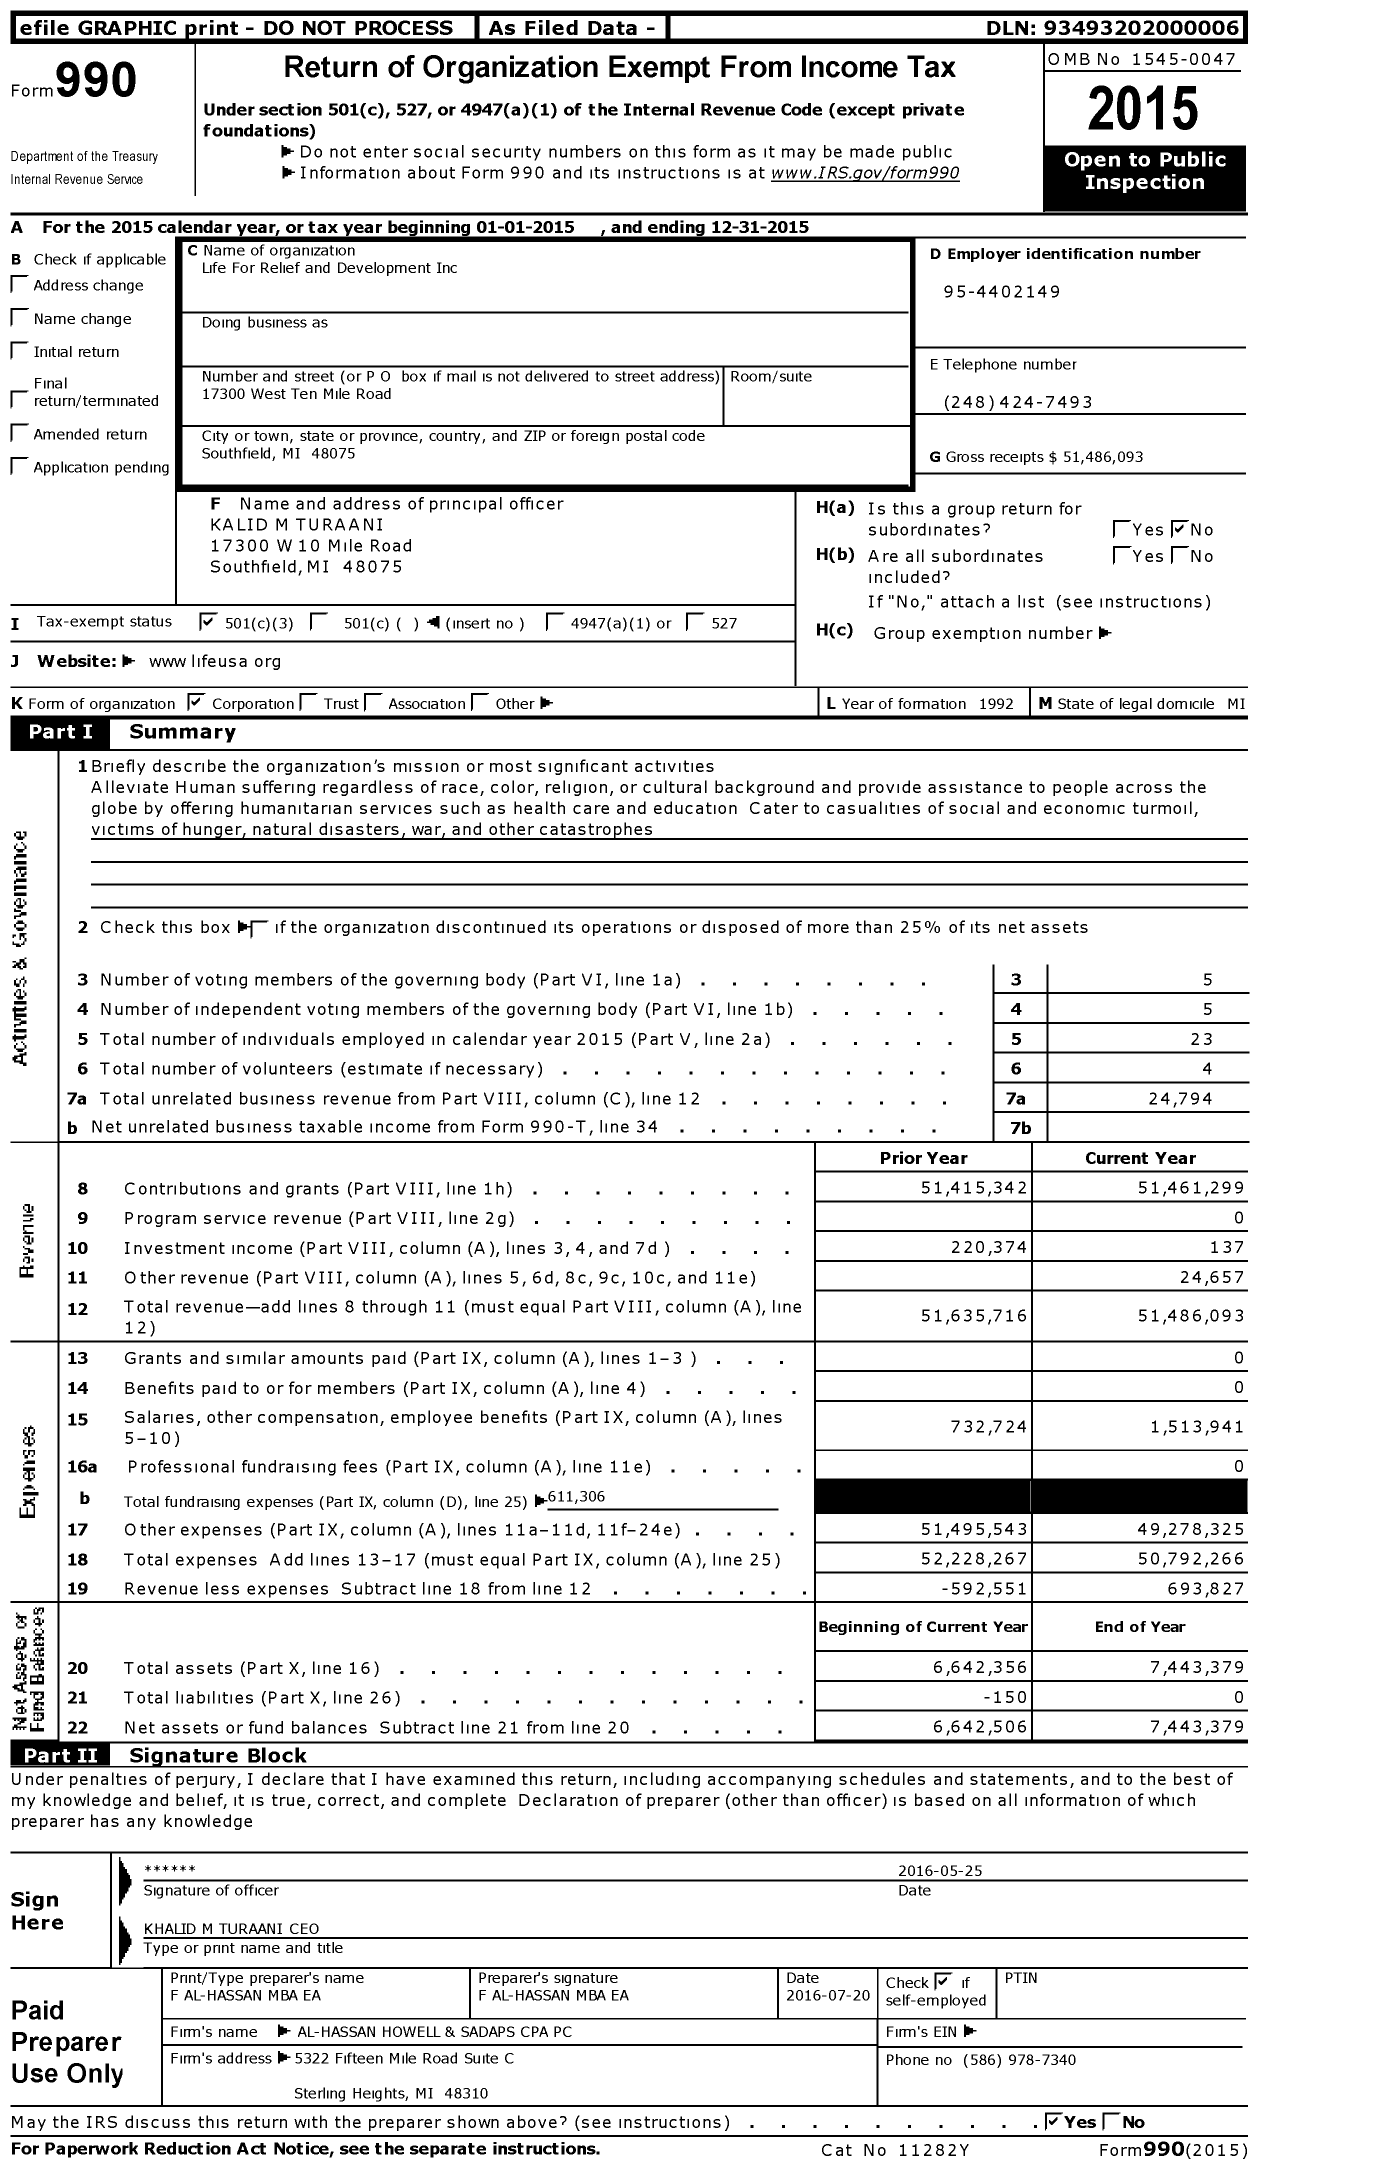 Image of first page of 2015 Form 990 for Life For Relief and Development